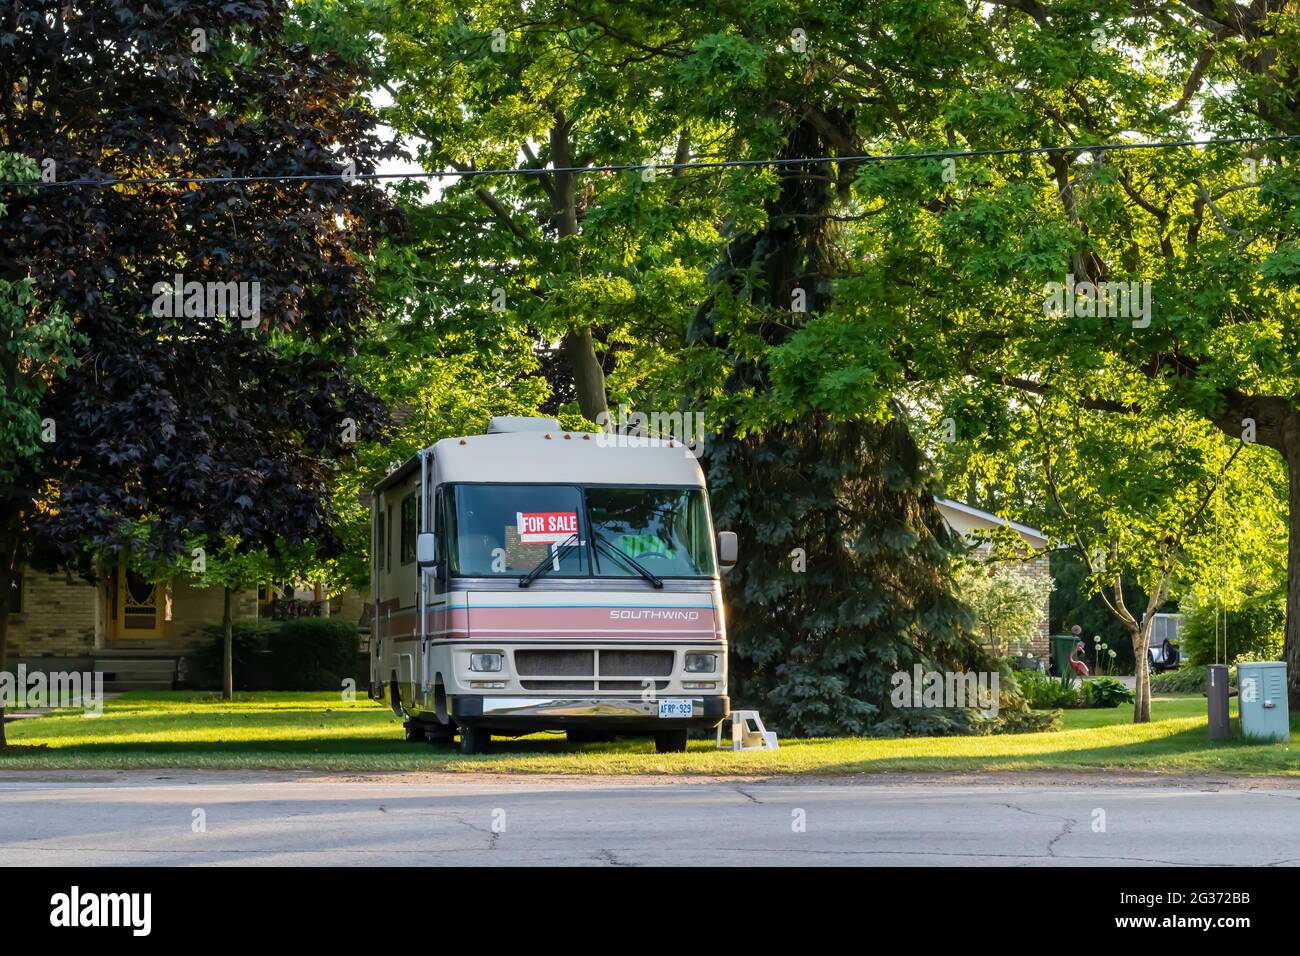 St. Thomas, Ontario, Canada - June 4 2021: Southwind brand recreational vehicle camper van with a for sale sign on the windshield. Stock Photo